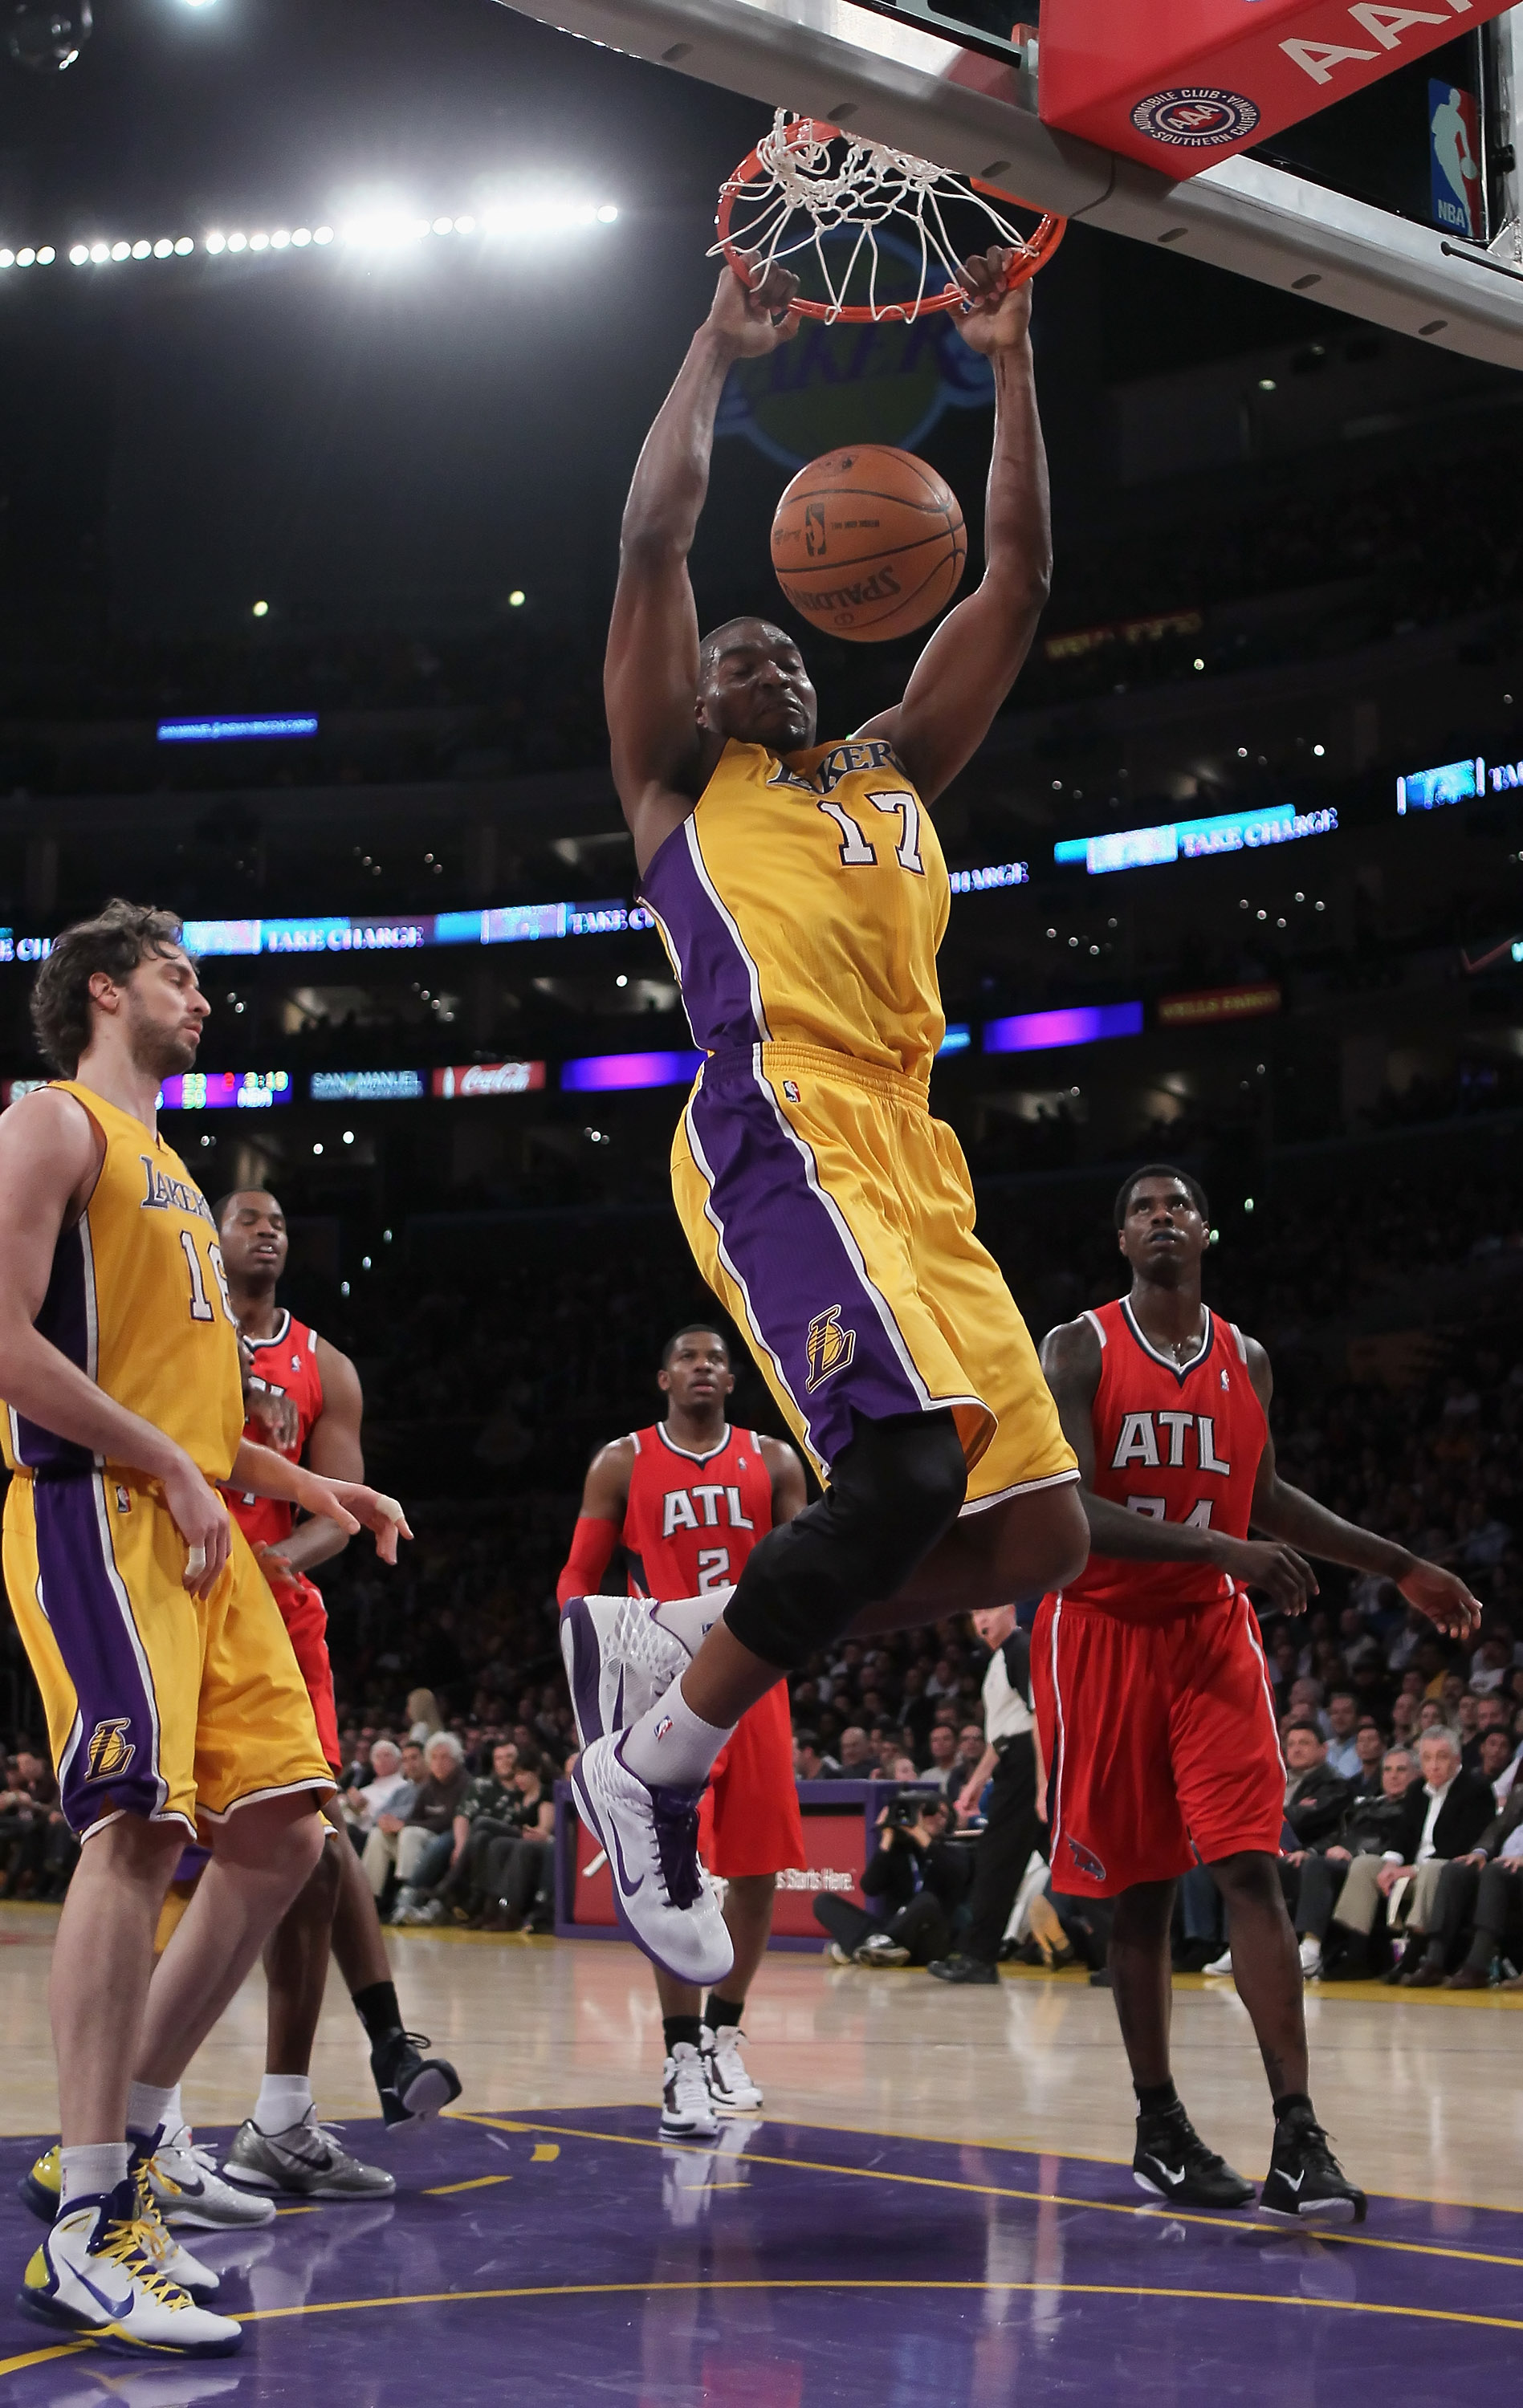 LOS ANGELES, CA - FEBRUARY 22:  Andrew Bynum #17 of the Los Angeles Lakers drives to the basket for a dunk against the Atlanta Hawks in the first half at Staples Center on February 22, 2011 in Los Angeles, California. NOTE TO USER: User expressly acknowle